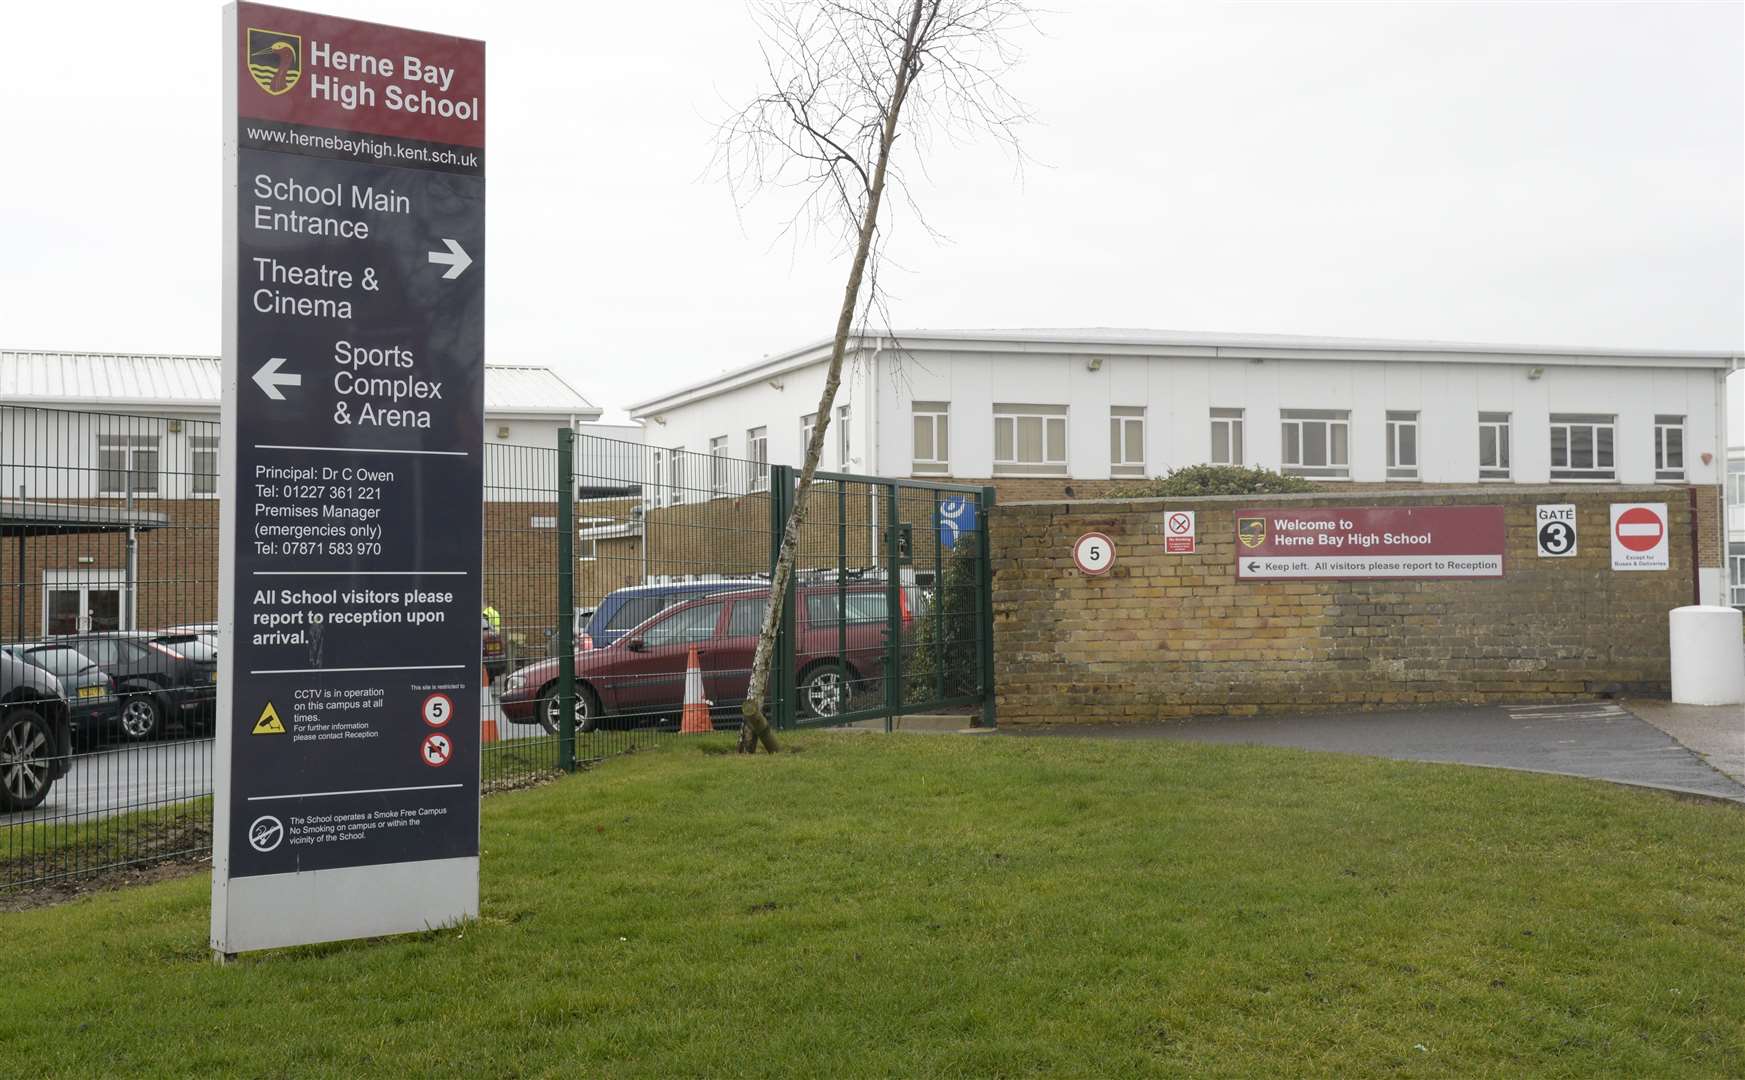 Herne Bay High School bosses say social media is "almost impossible to police"